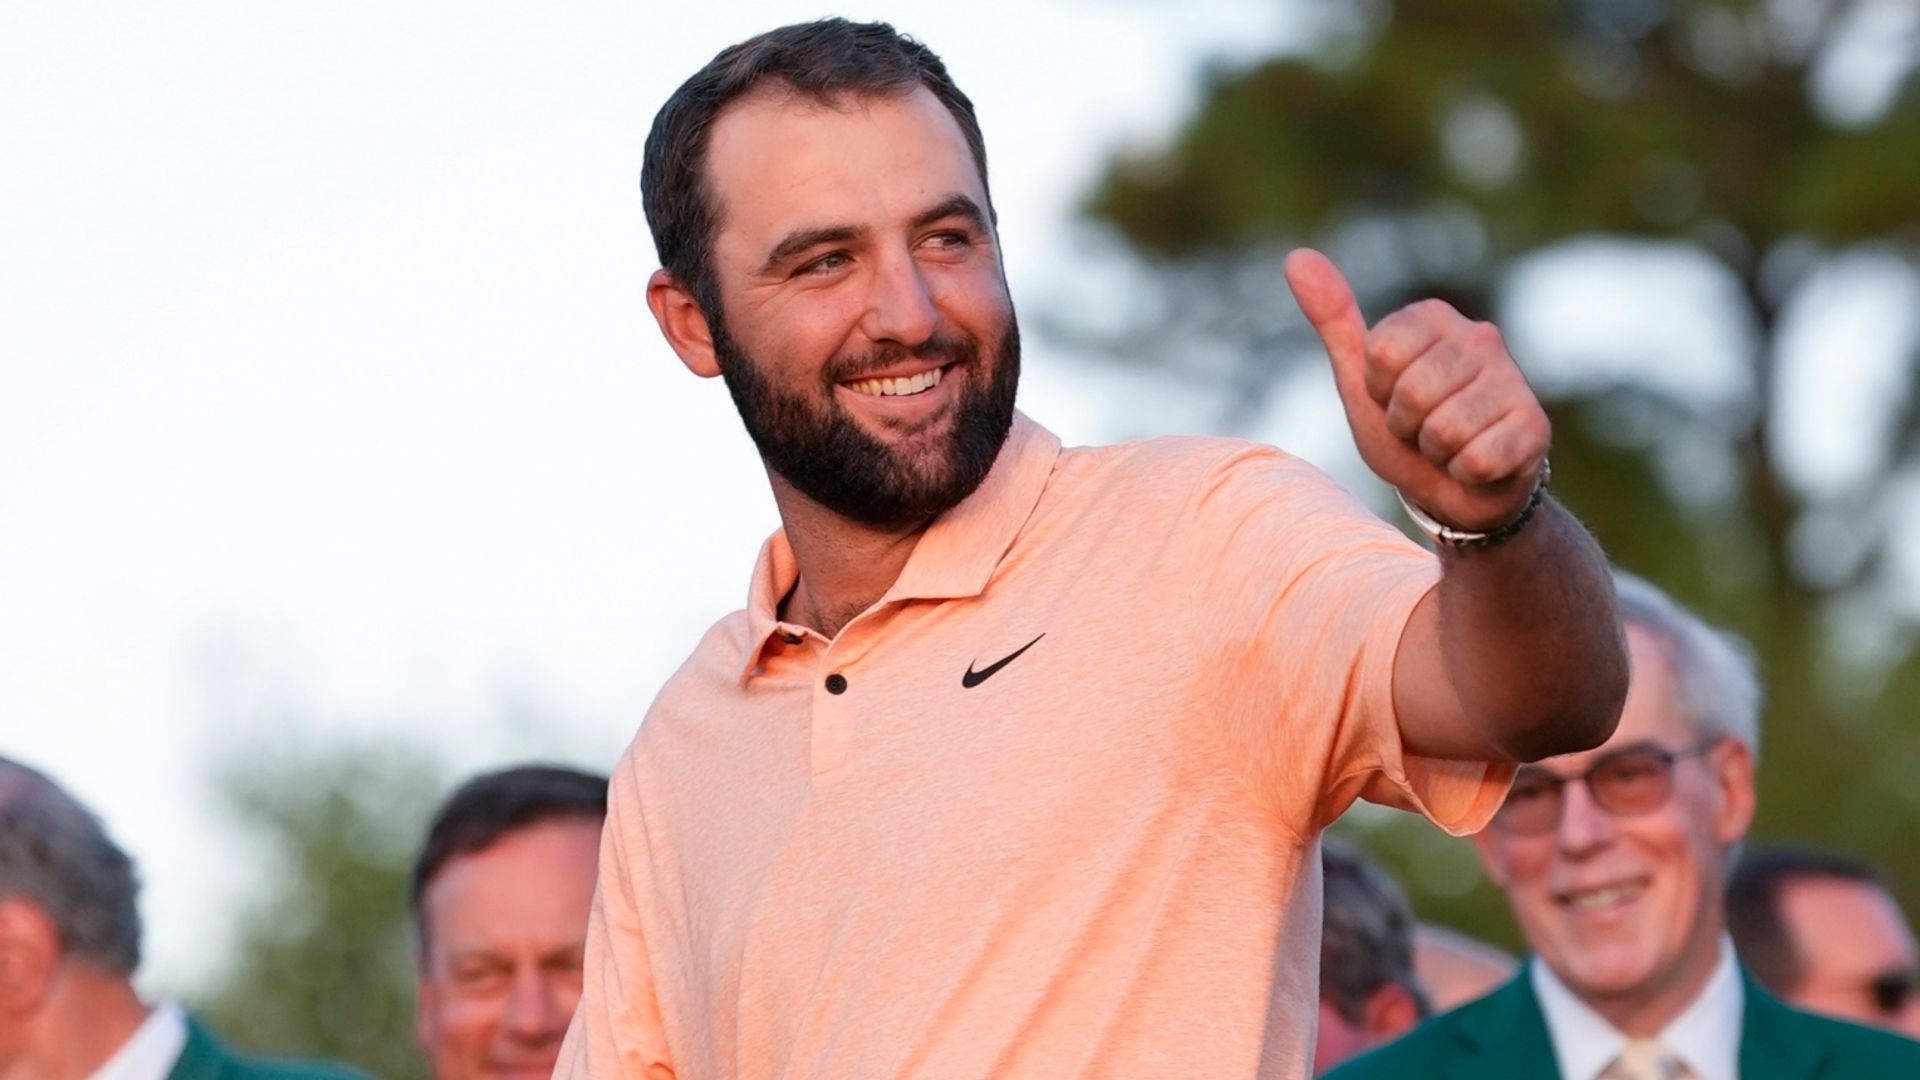 How does Scheffler compare to Woods after another Masters win?